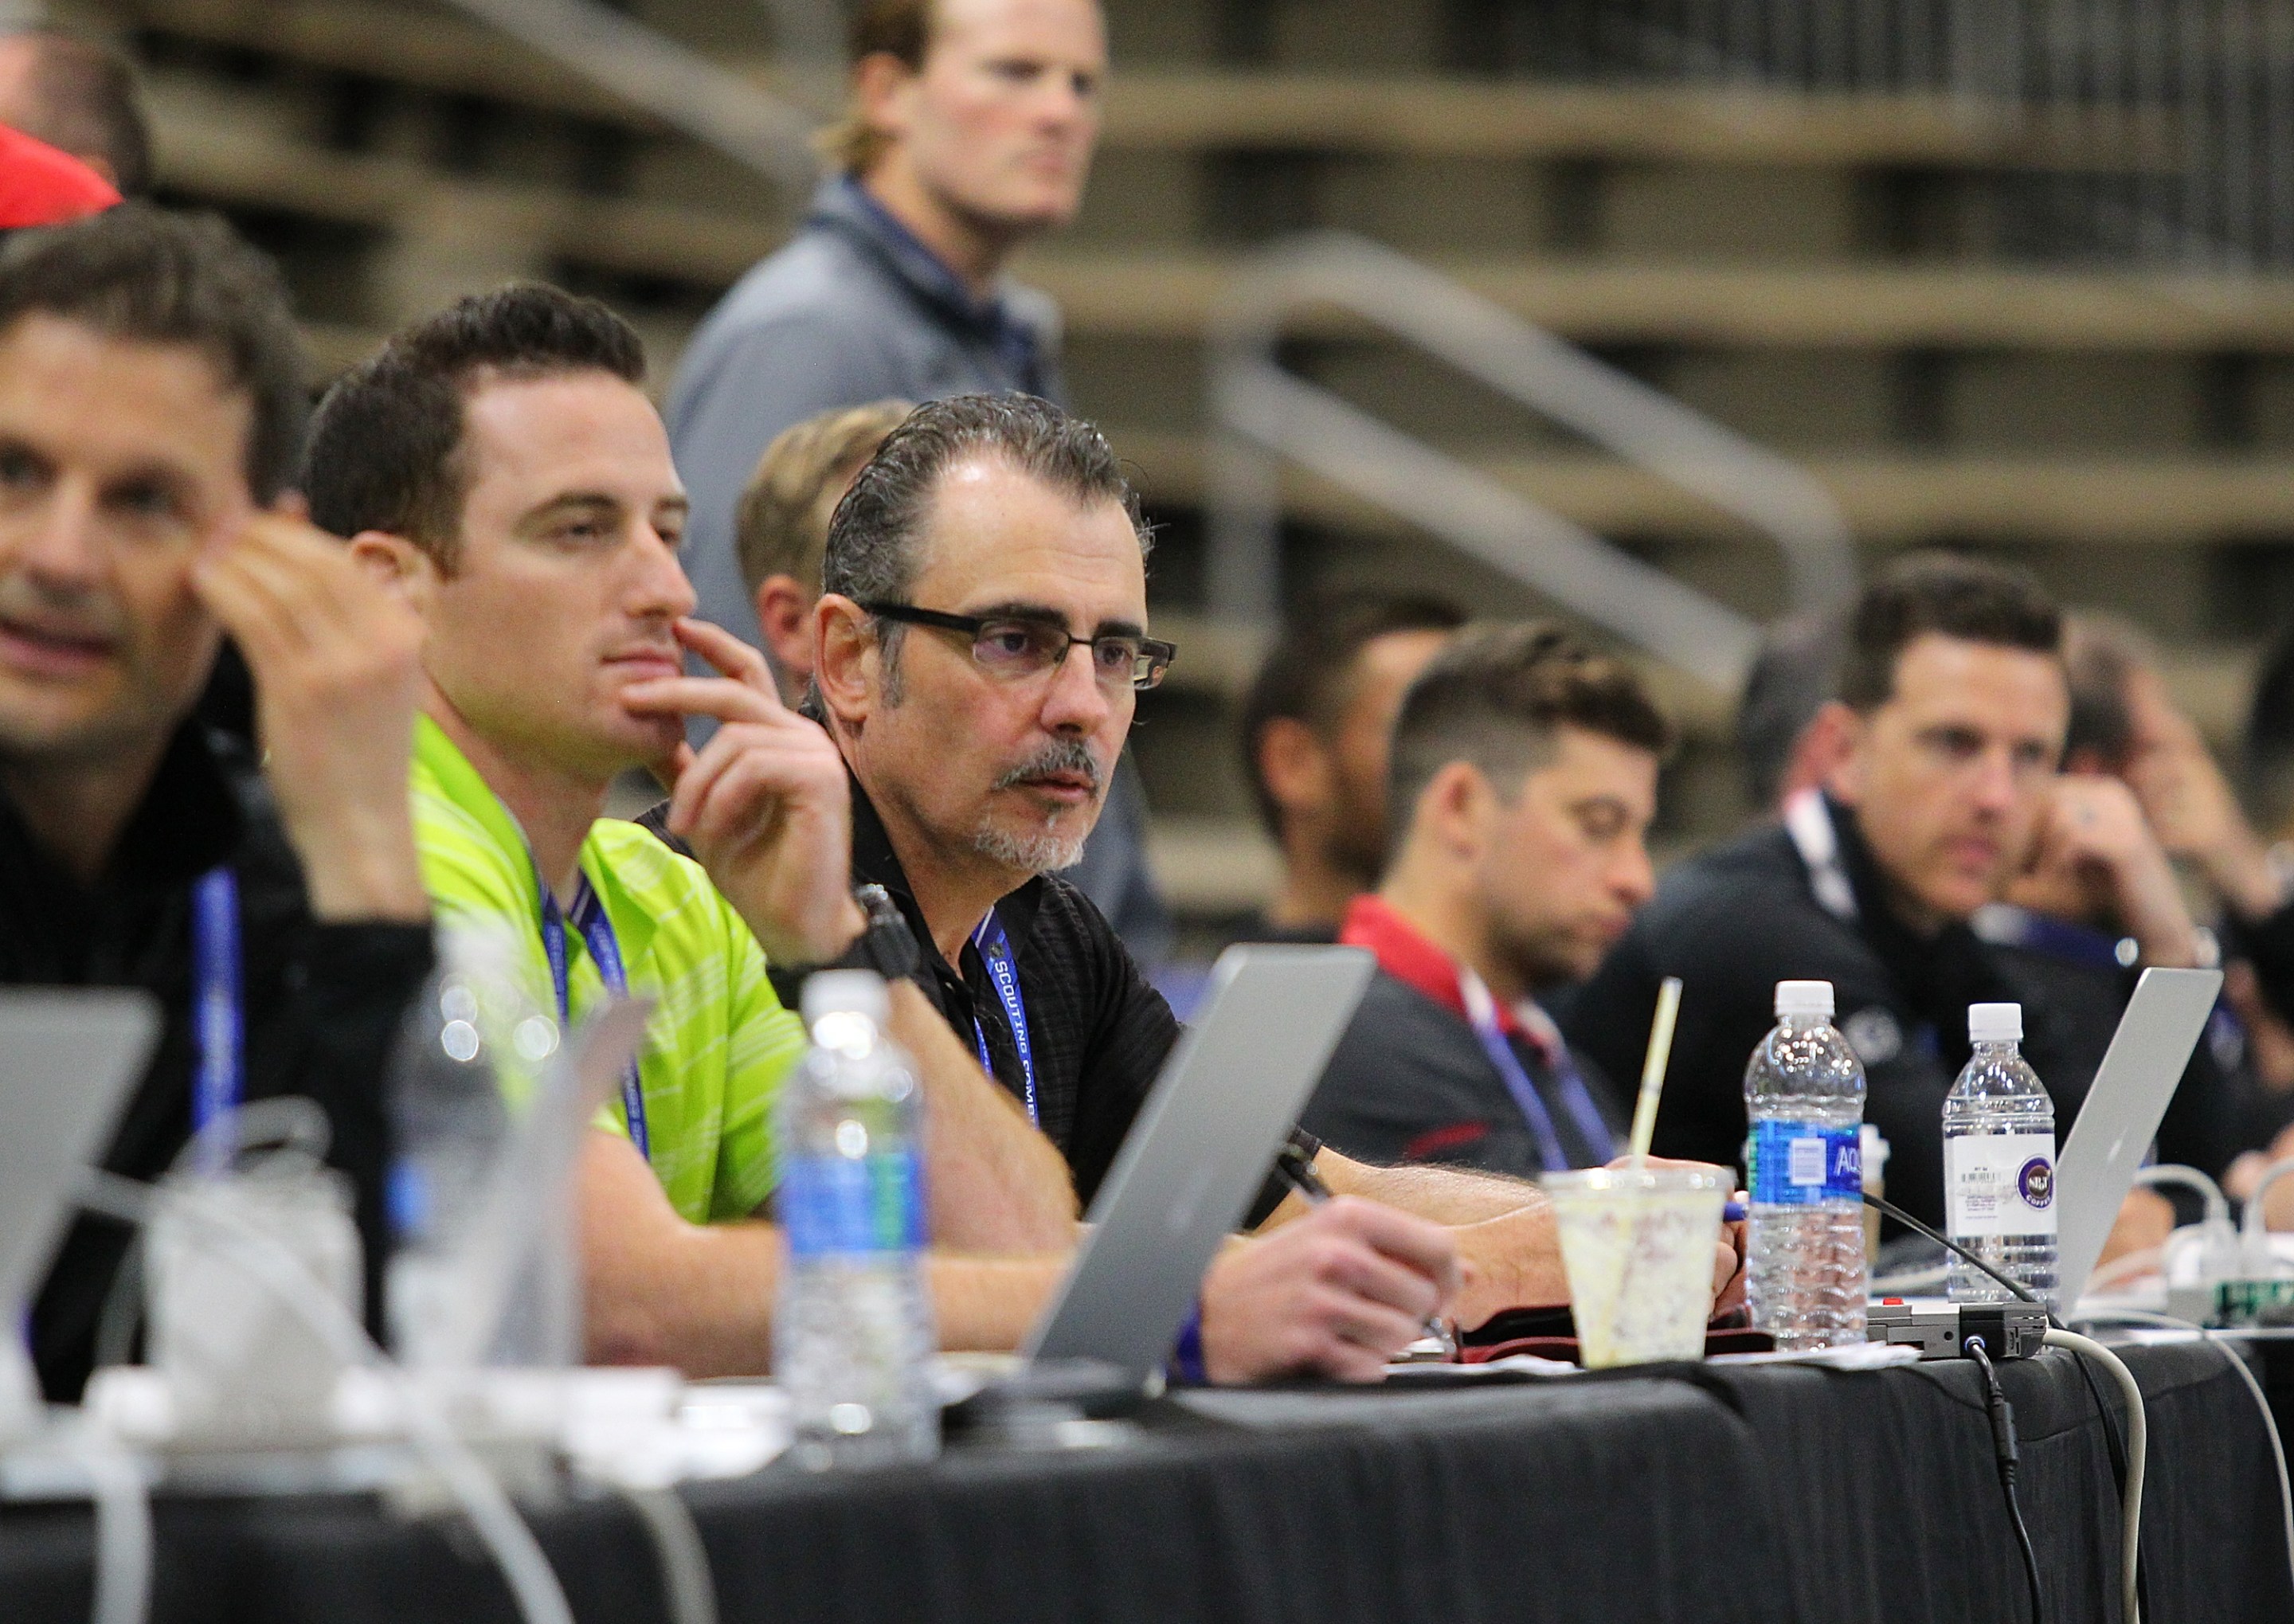 NHL team officials watch prospects take part in testing during the NHL Combine at HarborCenter on June 3, 2017 in Buffalo, New York.